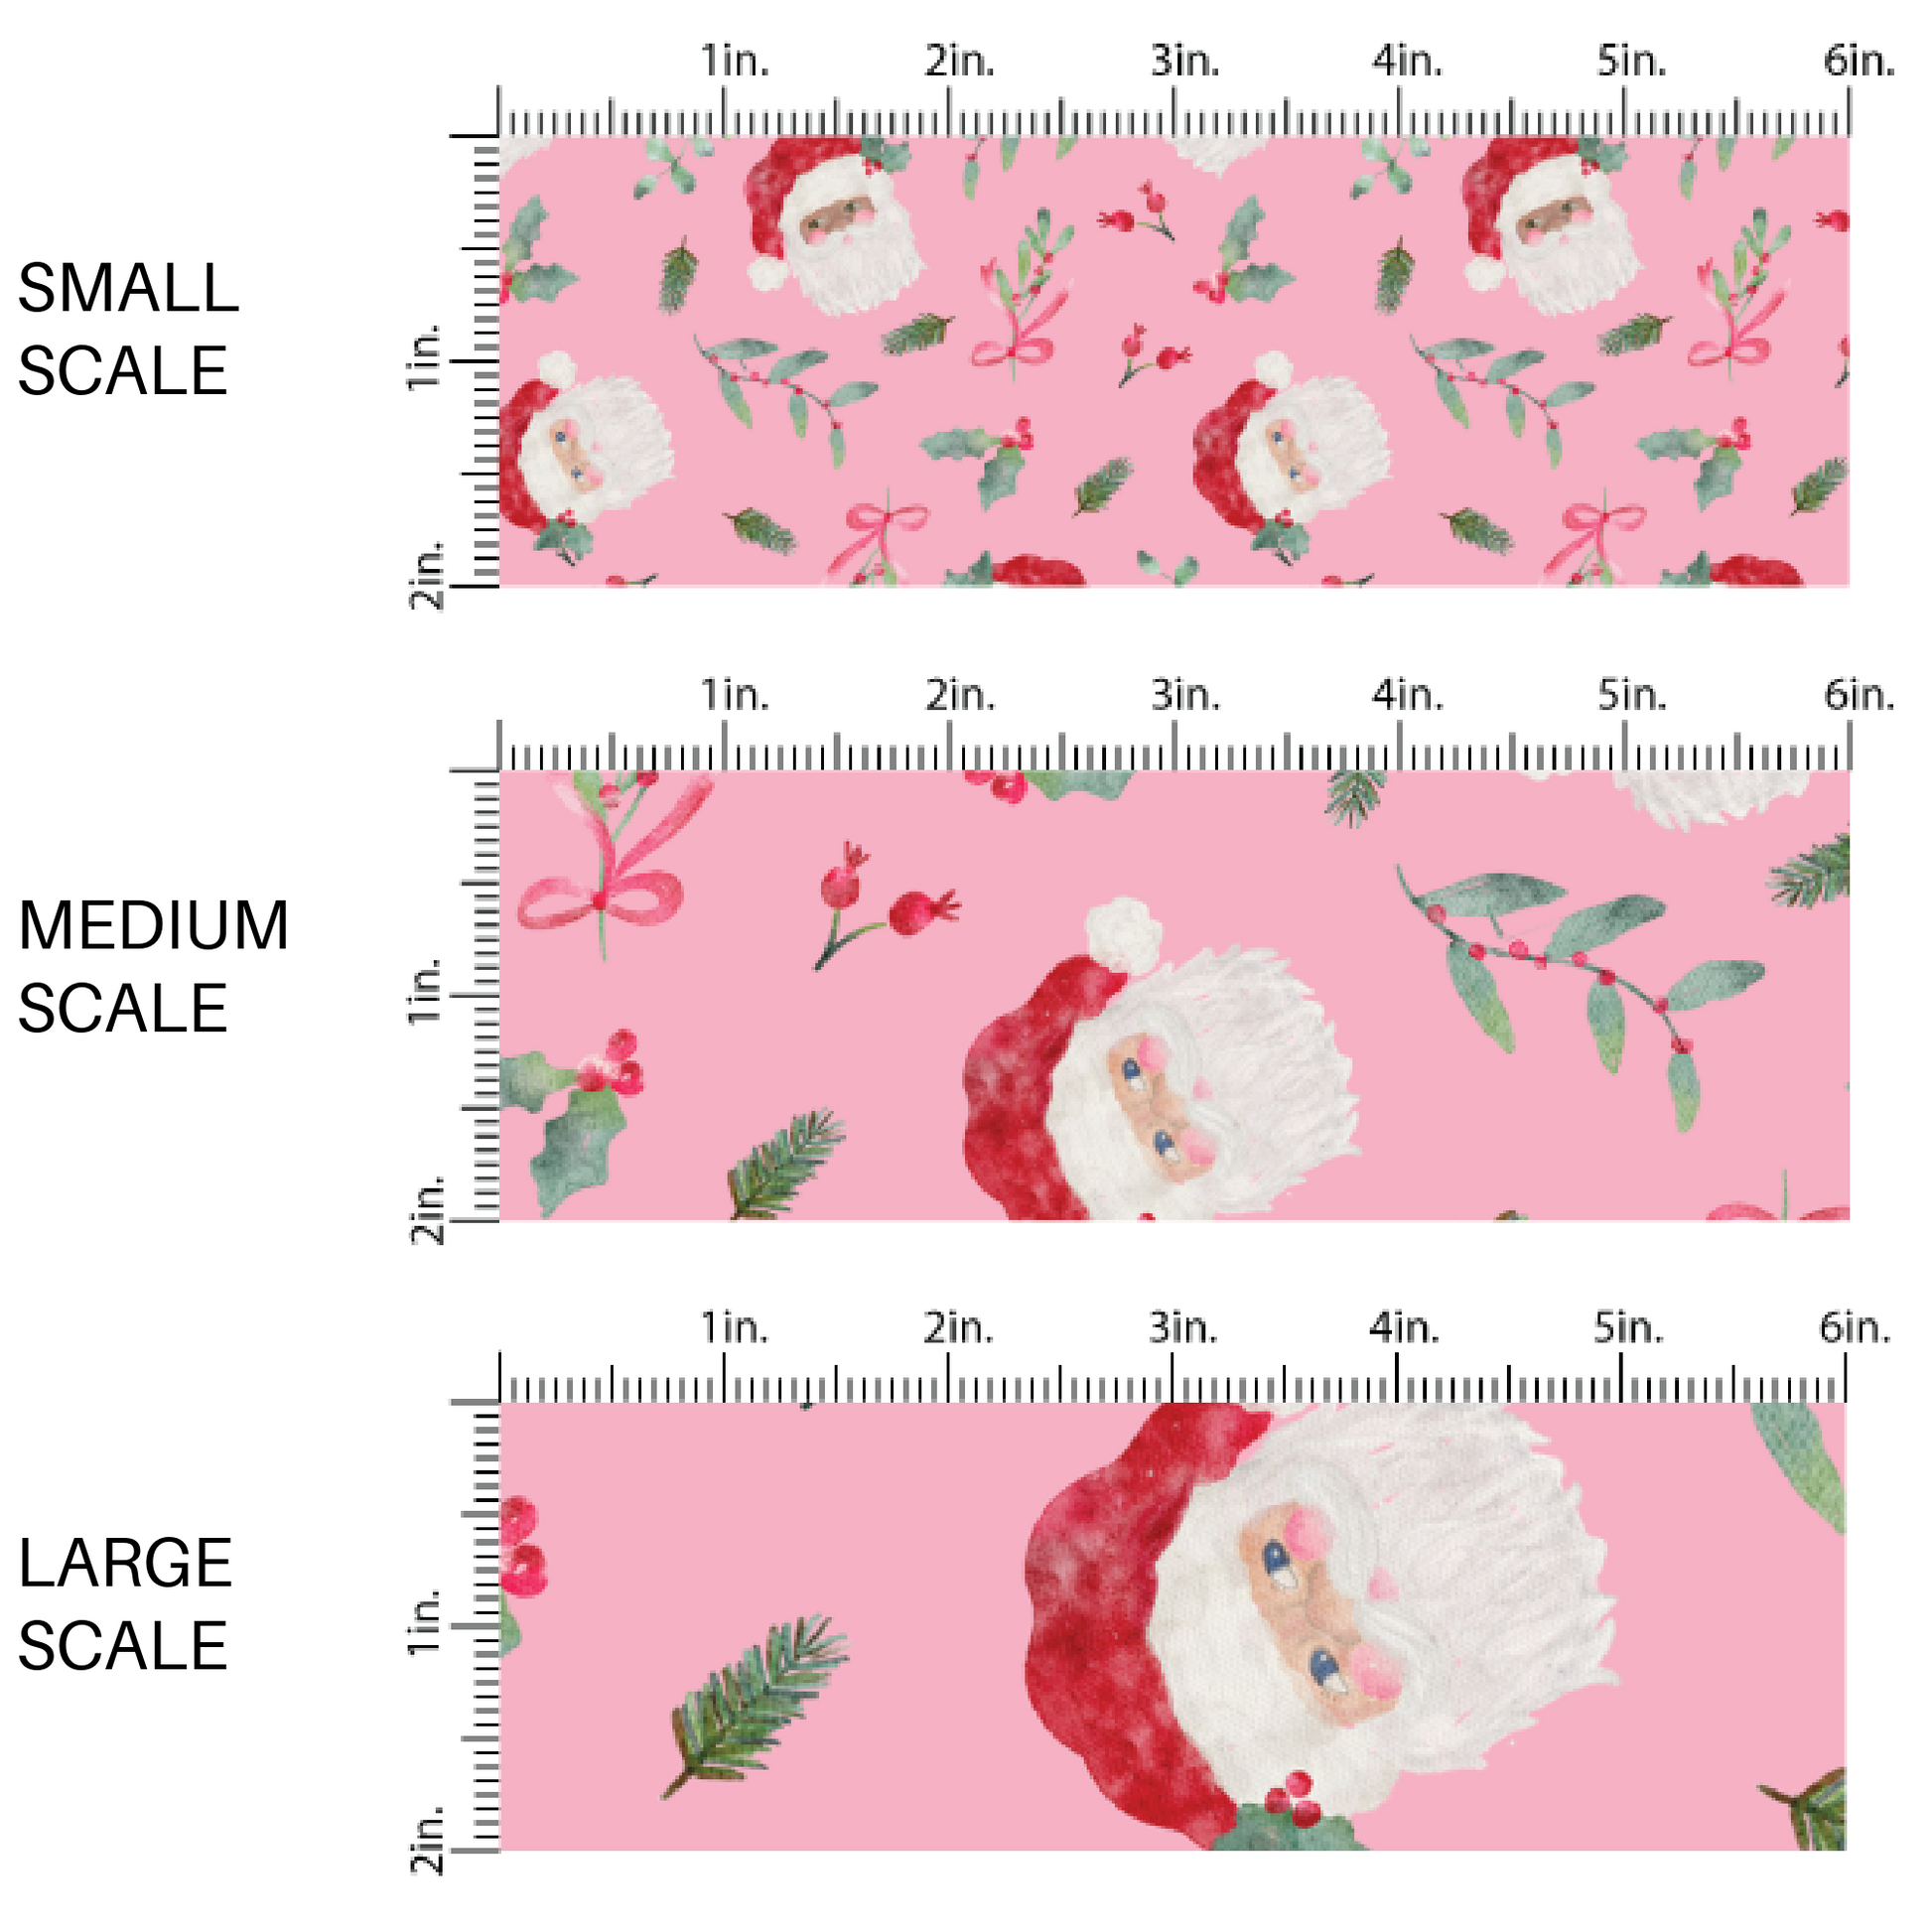 Pink fabric by the yard scaled image guide with mistletoe, holly leaves, and Santa Clause.